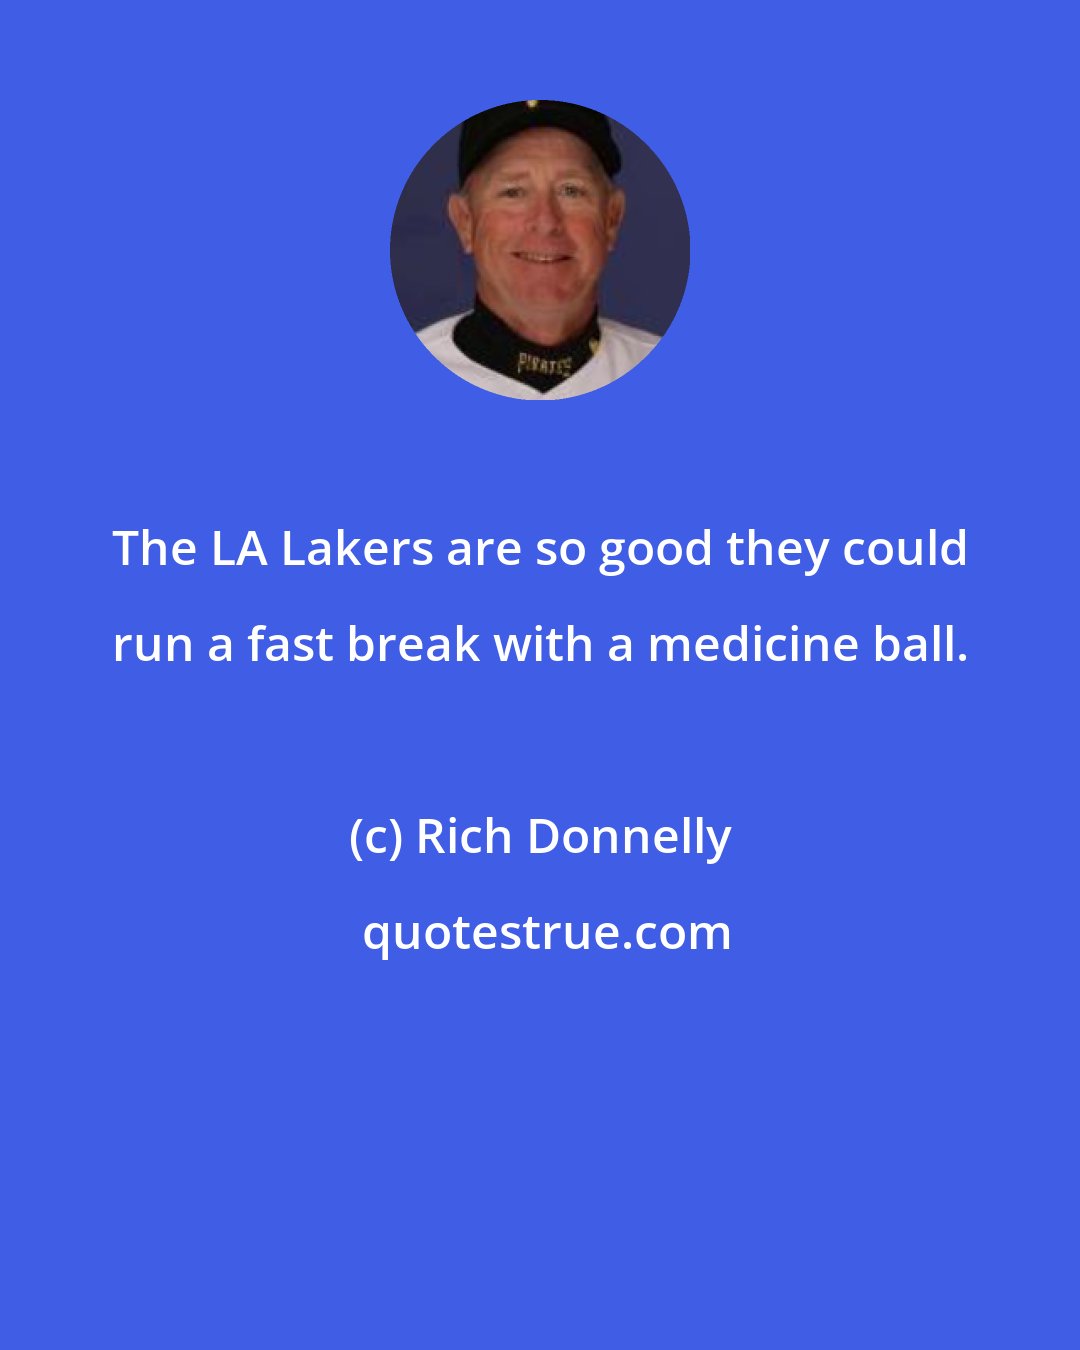 Rich Donnelly: The LA Lakers are so good they could run a fast break with a medicine ball.